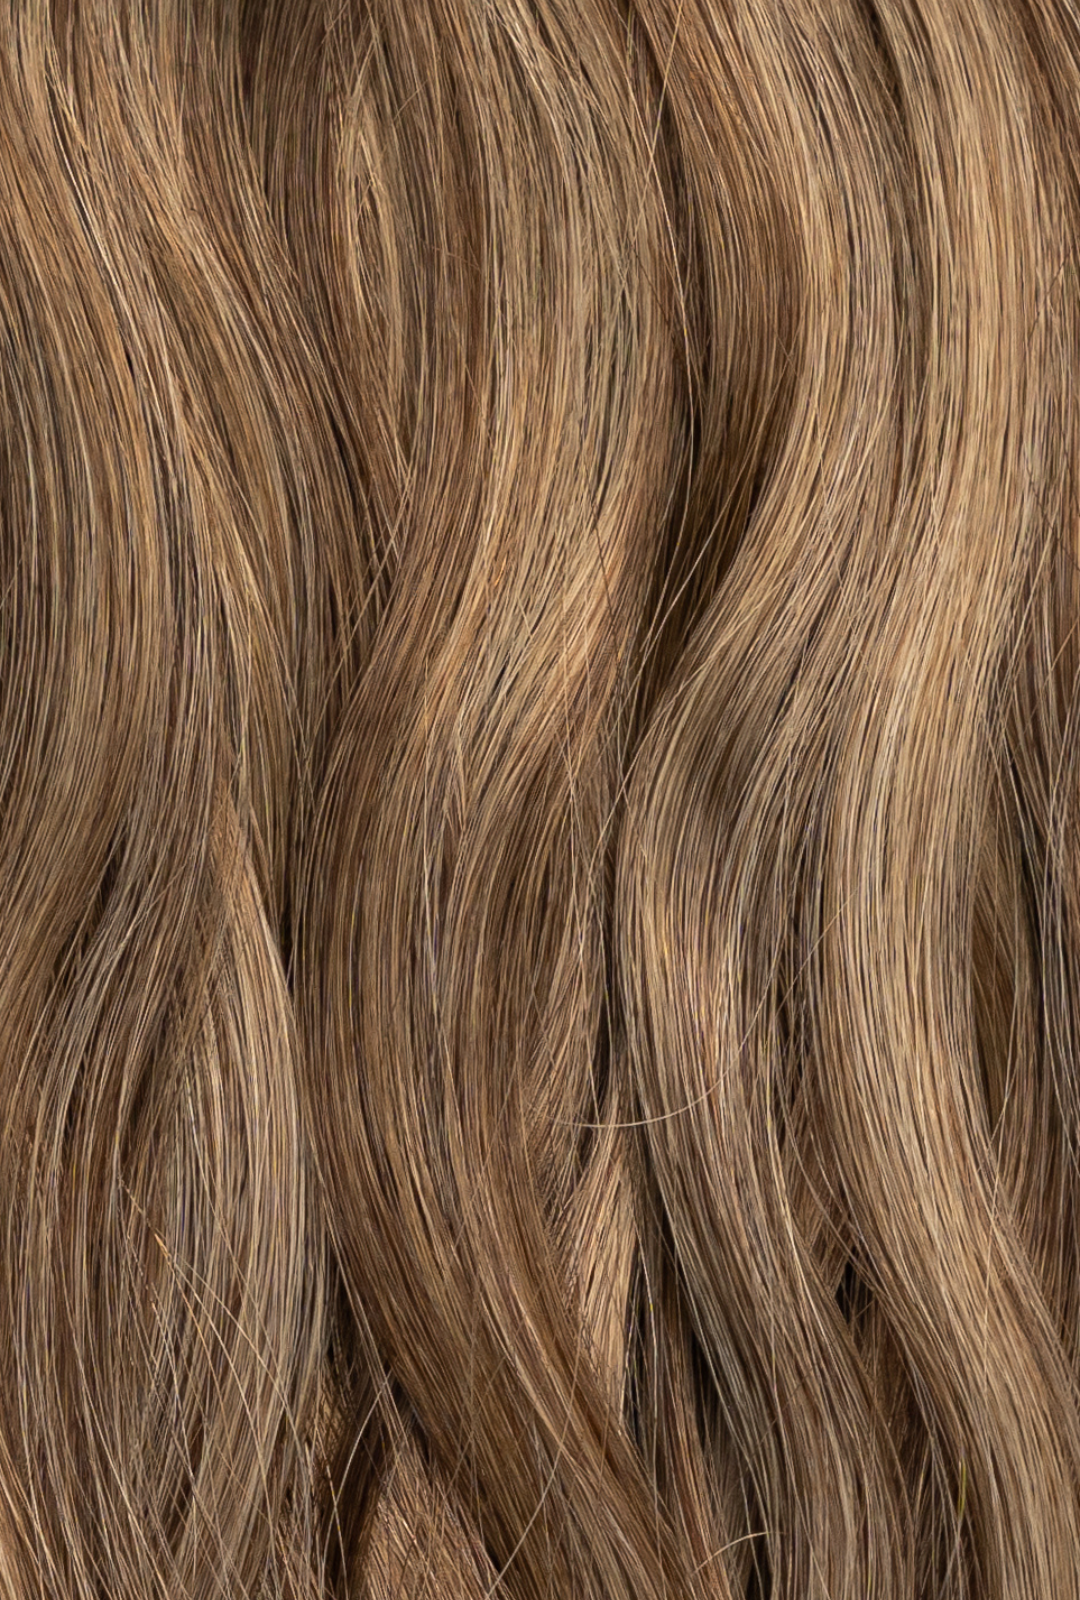 Waved Machine Sewn Weft Dimensional #4/8 (Cappuccino)